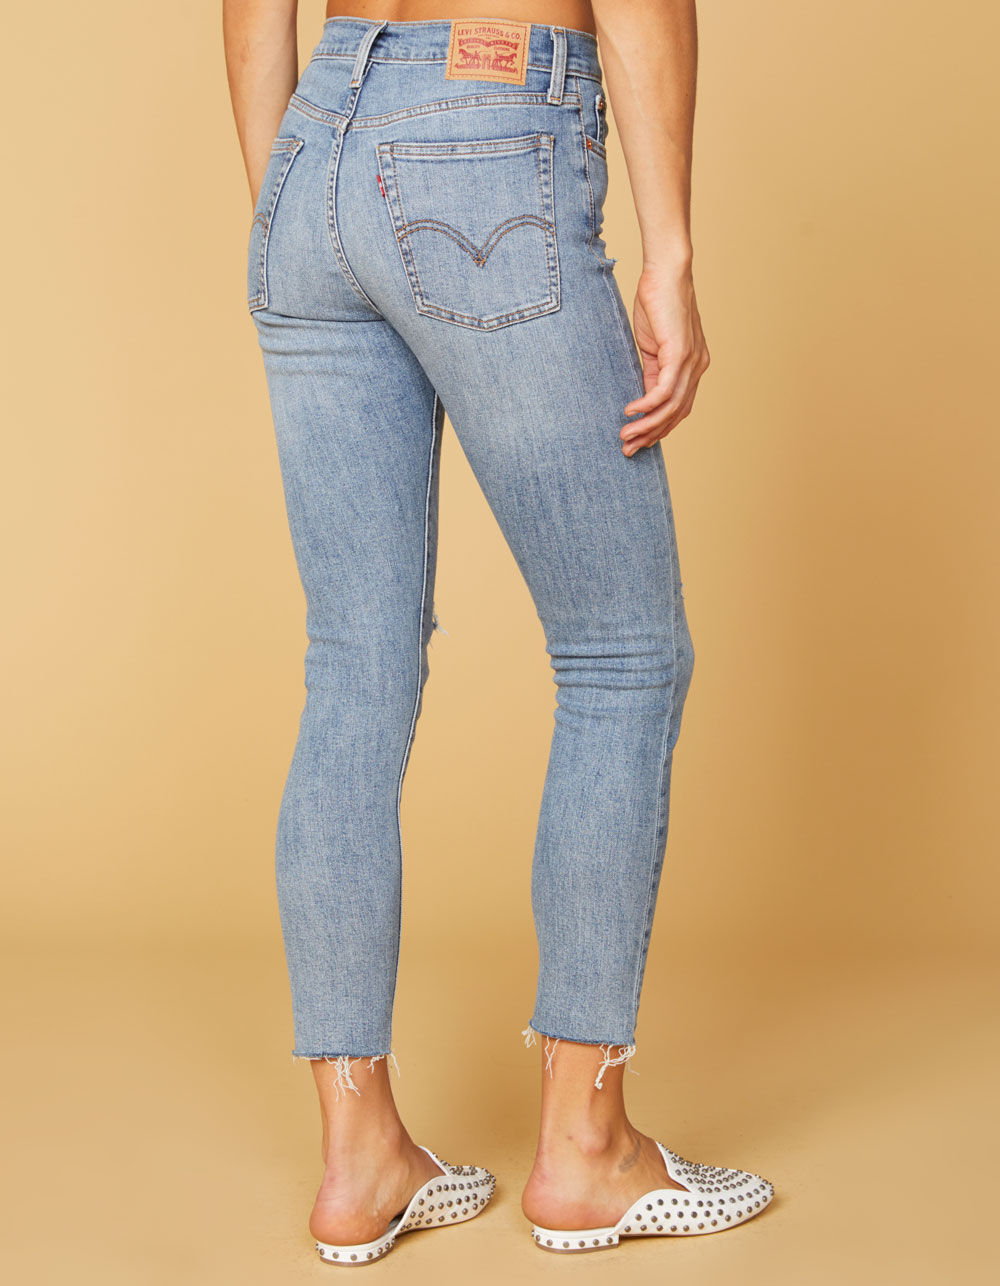 LEVI'S Wedgie High Rise Blue Spice Womens Skinny Ripped Jeans - BLUE SPICE  | Tillys